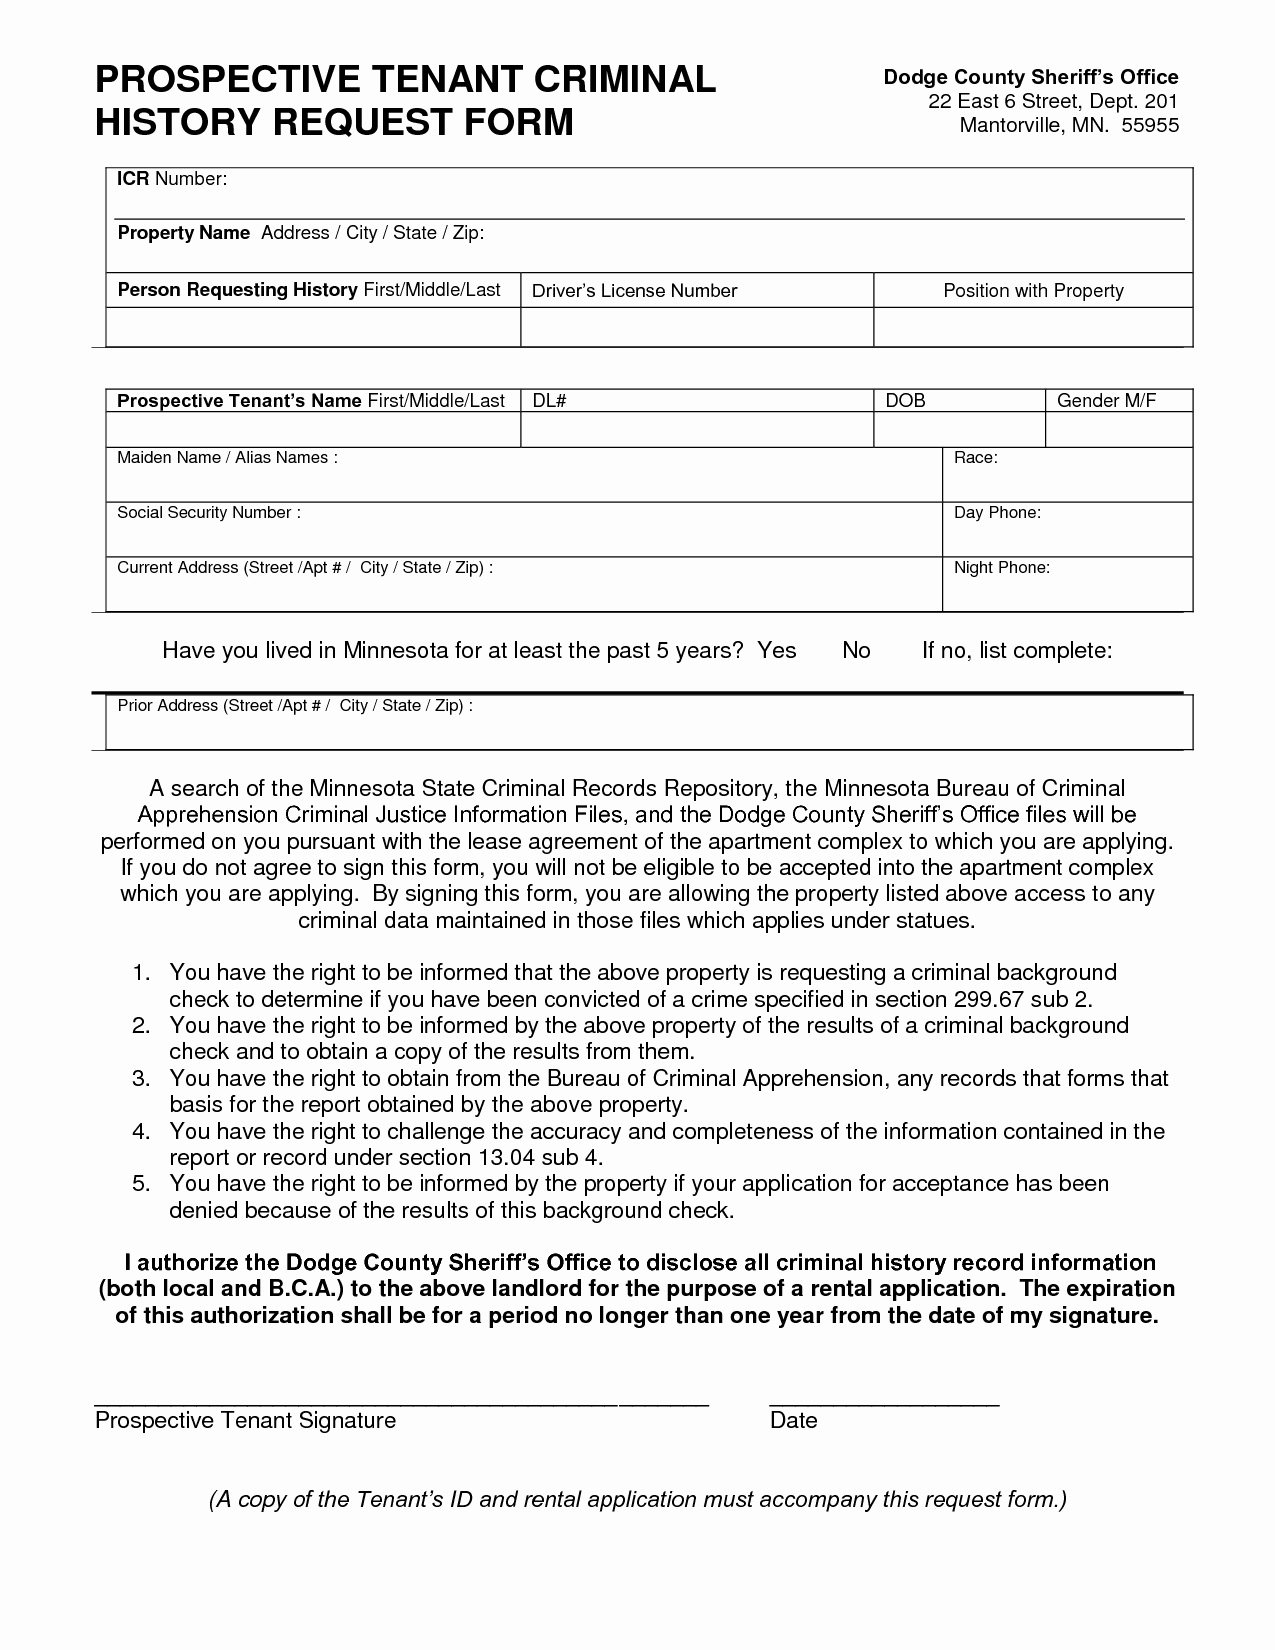 Background Check form Template Free New Tenant Criminal Background Check form Inquire before Your